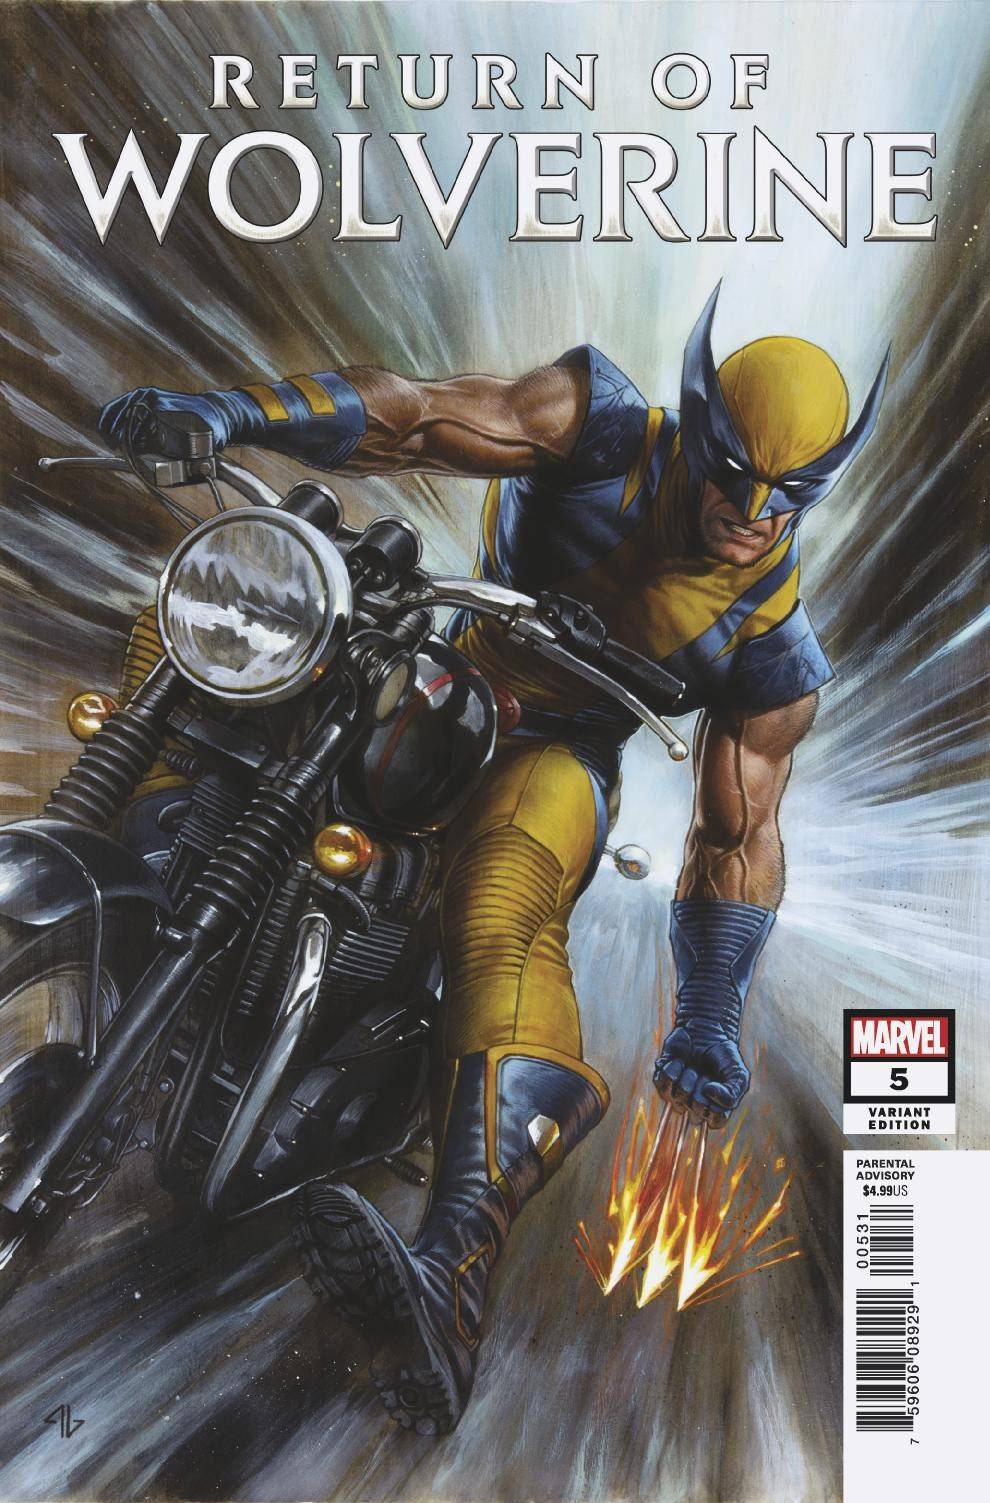 Return of Wolverine #5 (of 5) Incentive Variant Edition (Granov) [2019]